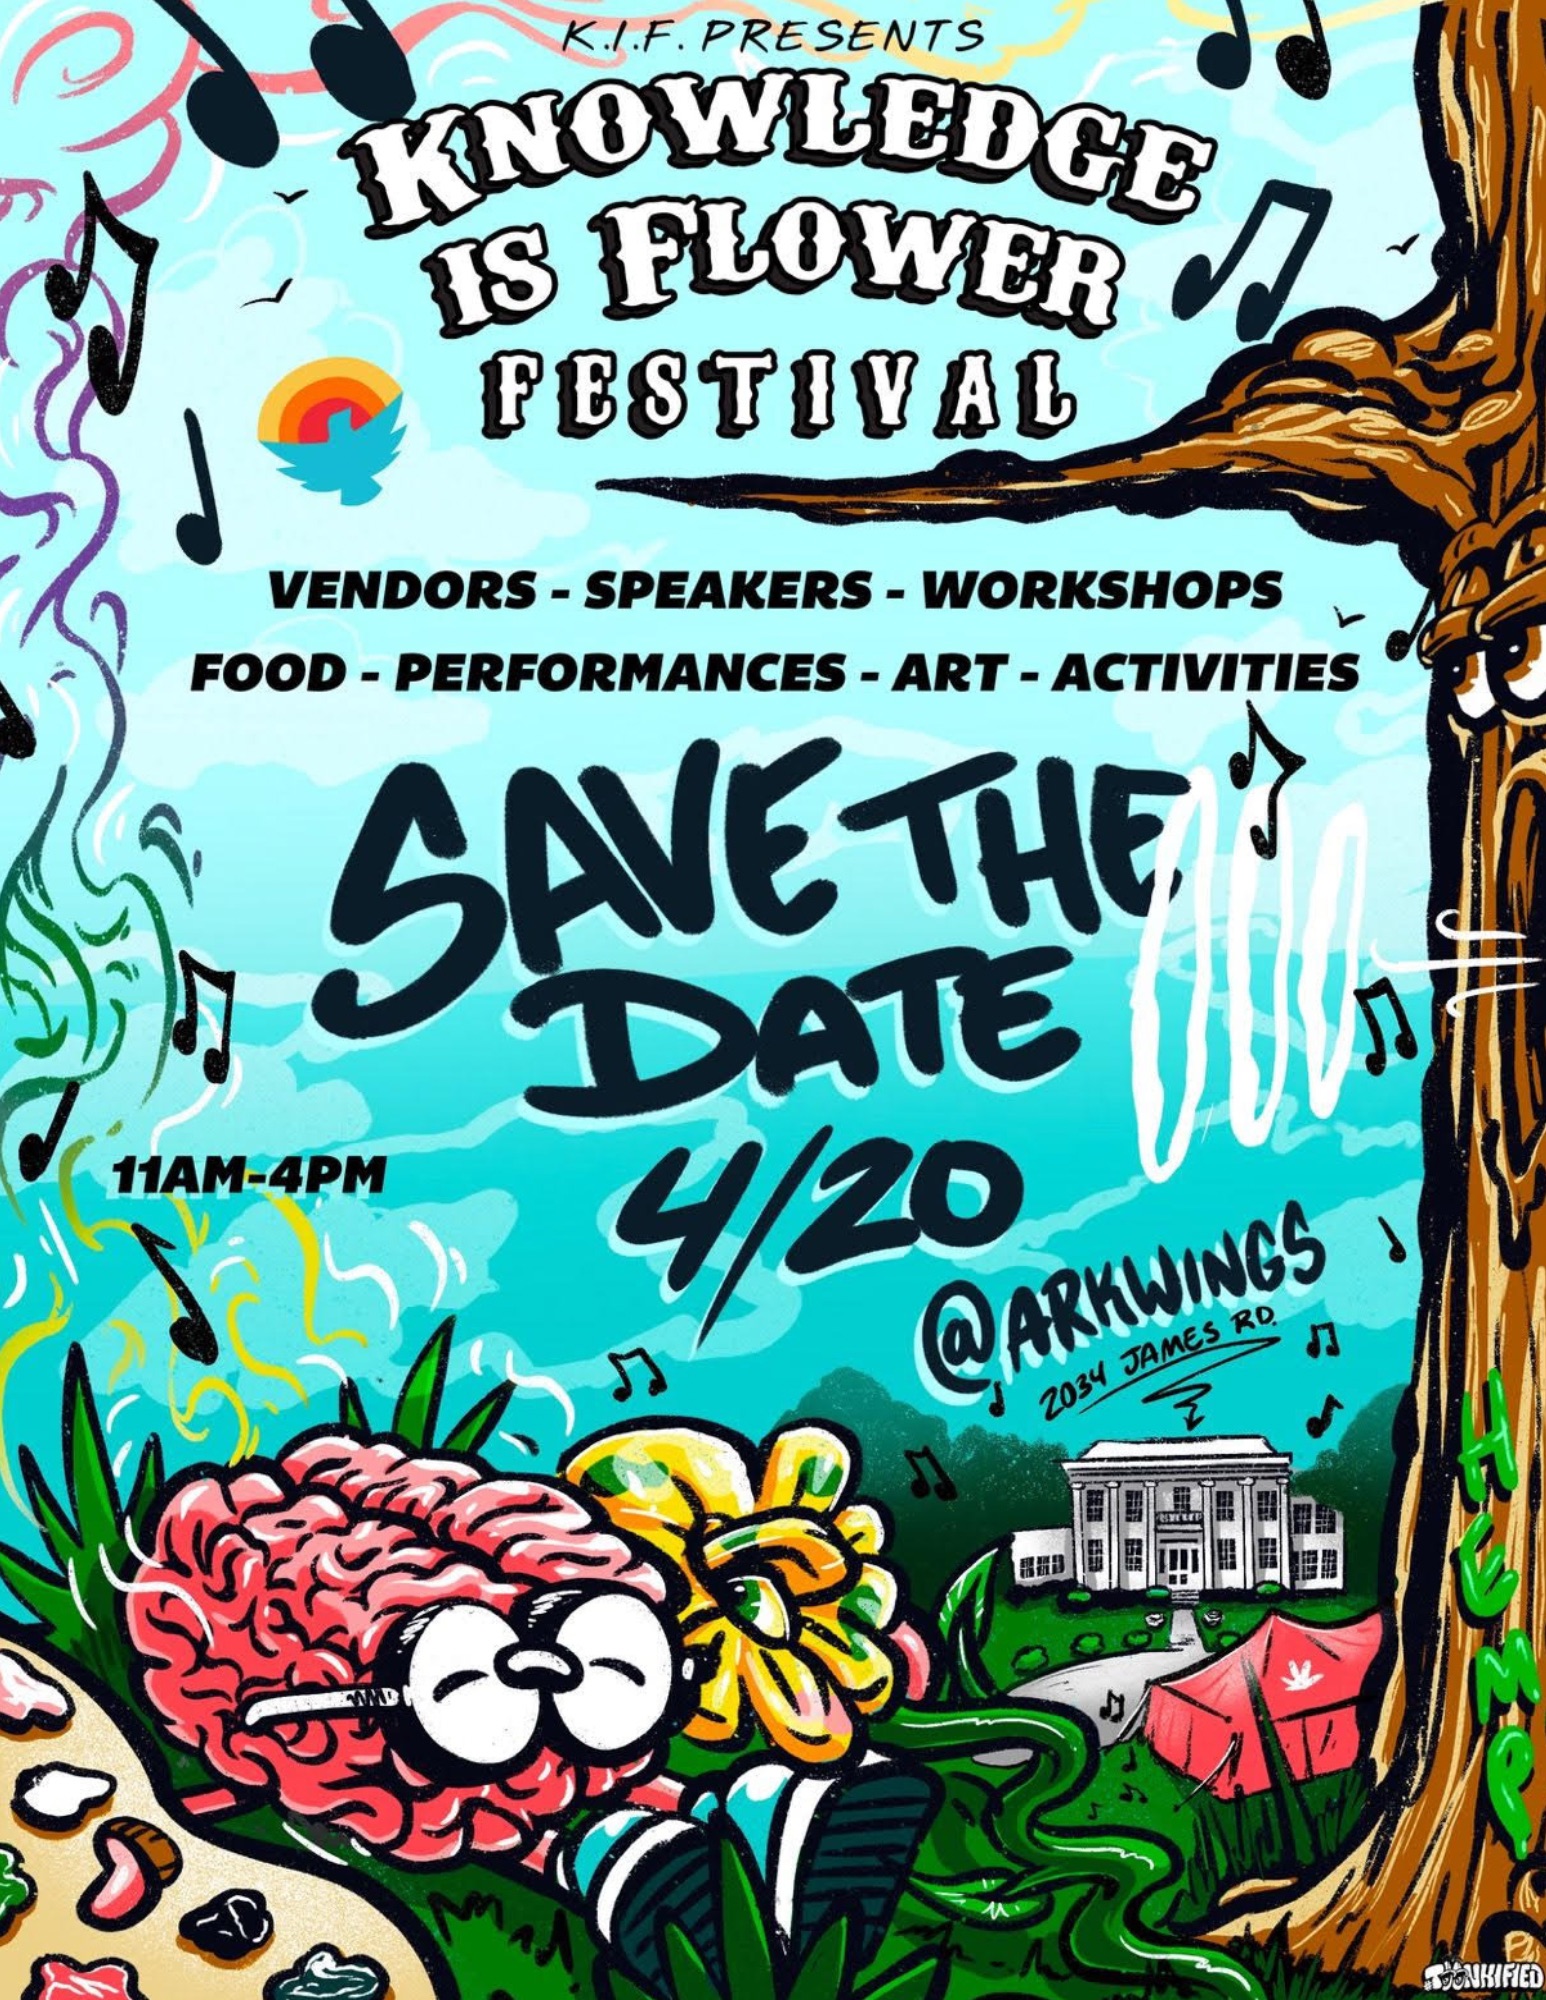 Promotional poster for the "knowledge is power" flower festival, featuring vibrant, cartoon-style artwork with event details for April 20th, including vendors, workshops, and performances.